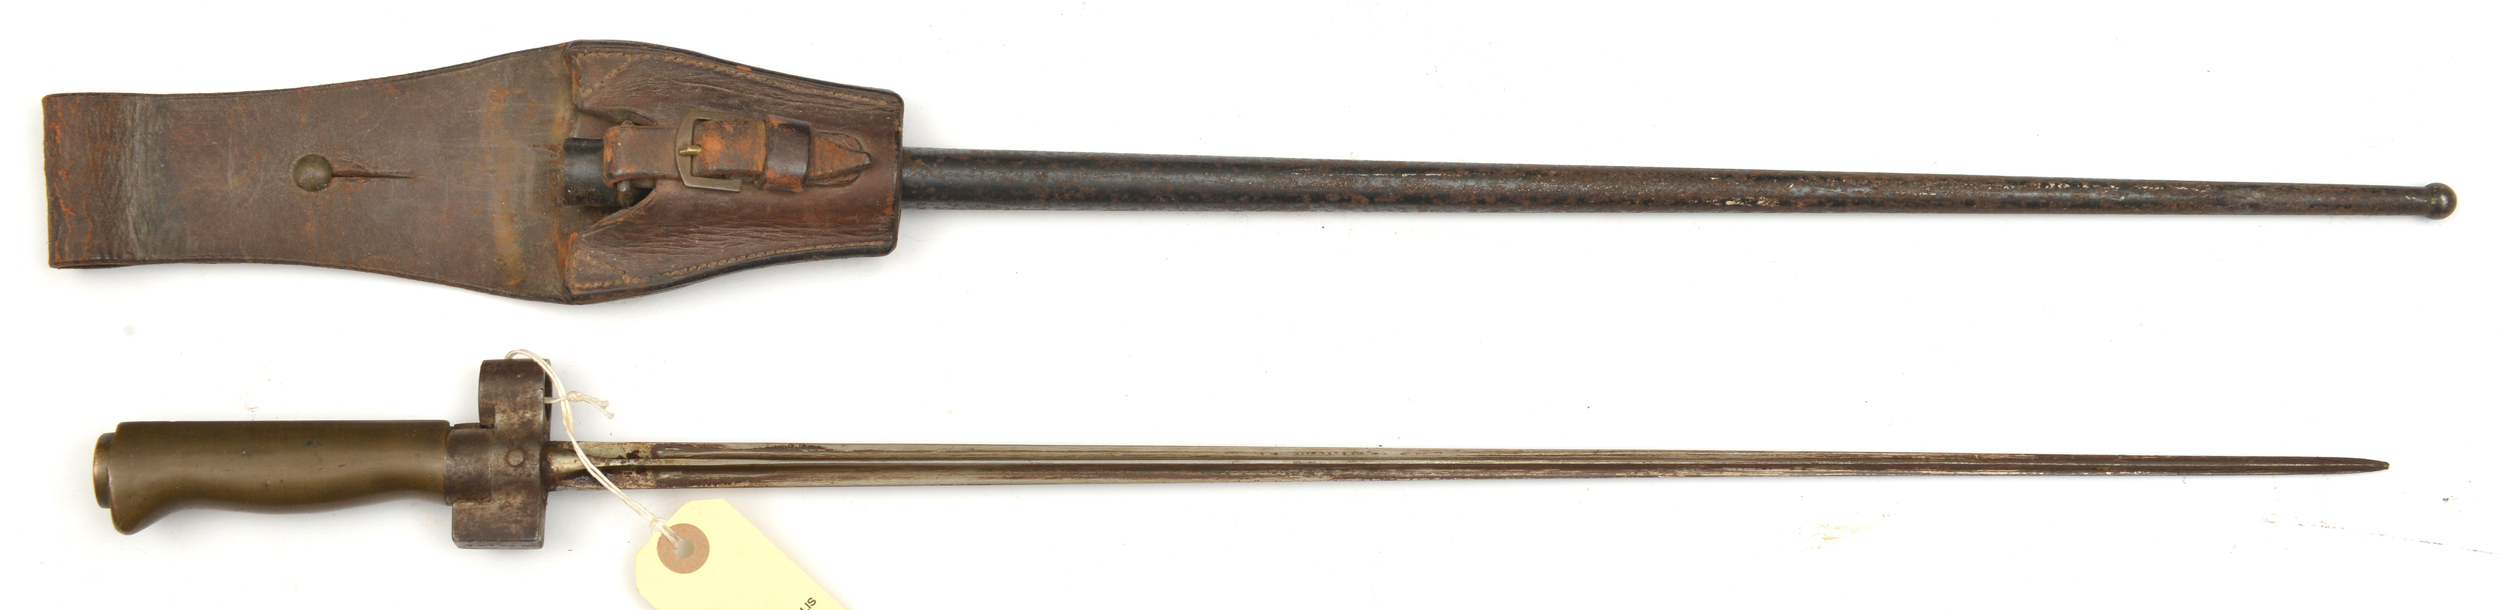 A Lebel bayonet, without quillon, in its steel scabbard numbered 221156 en suite with hilt, brown